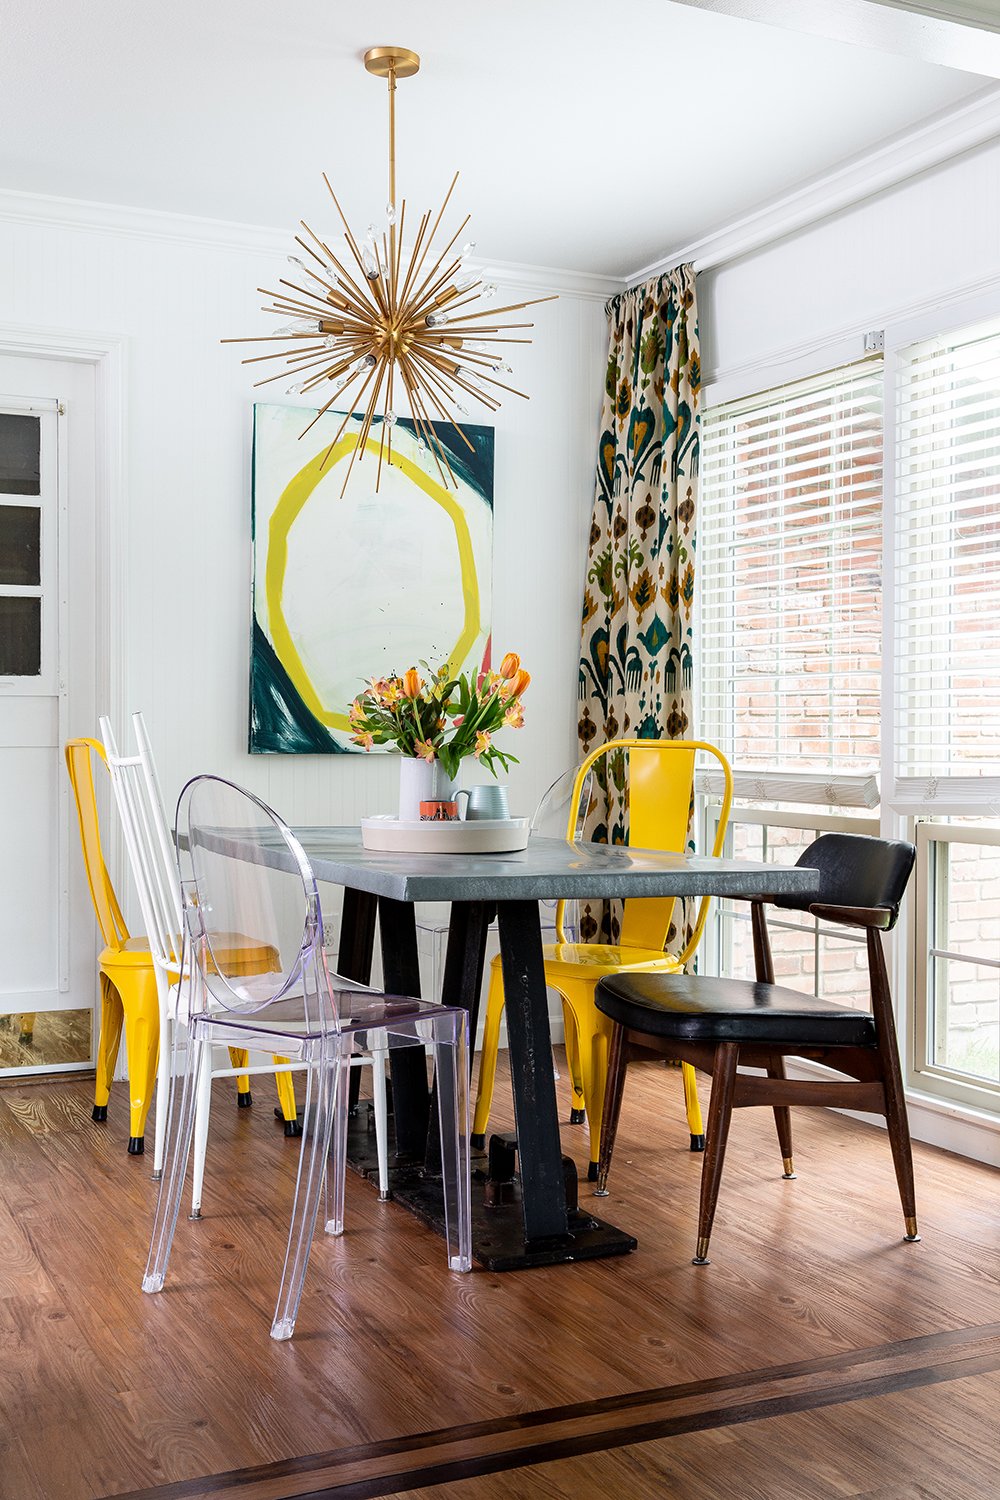 A funky, eclectic dining room by interior designer Lesley Myrick